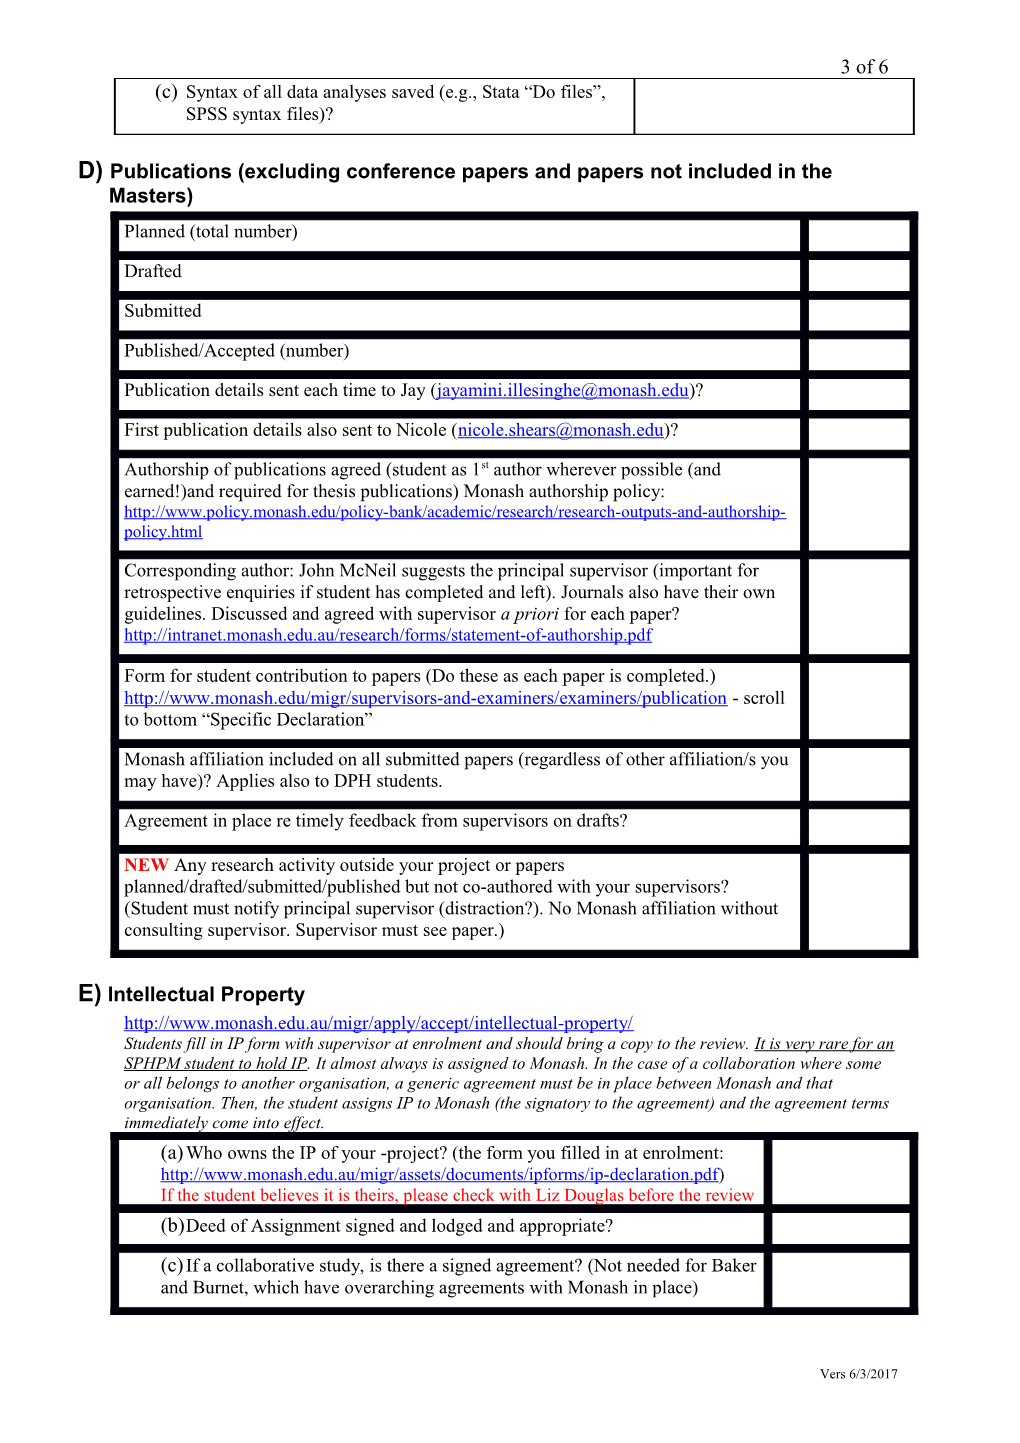 Chairs Checklist for Reviews (Background and More Details in Separate Document)